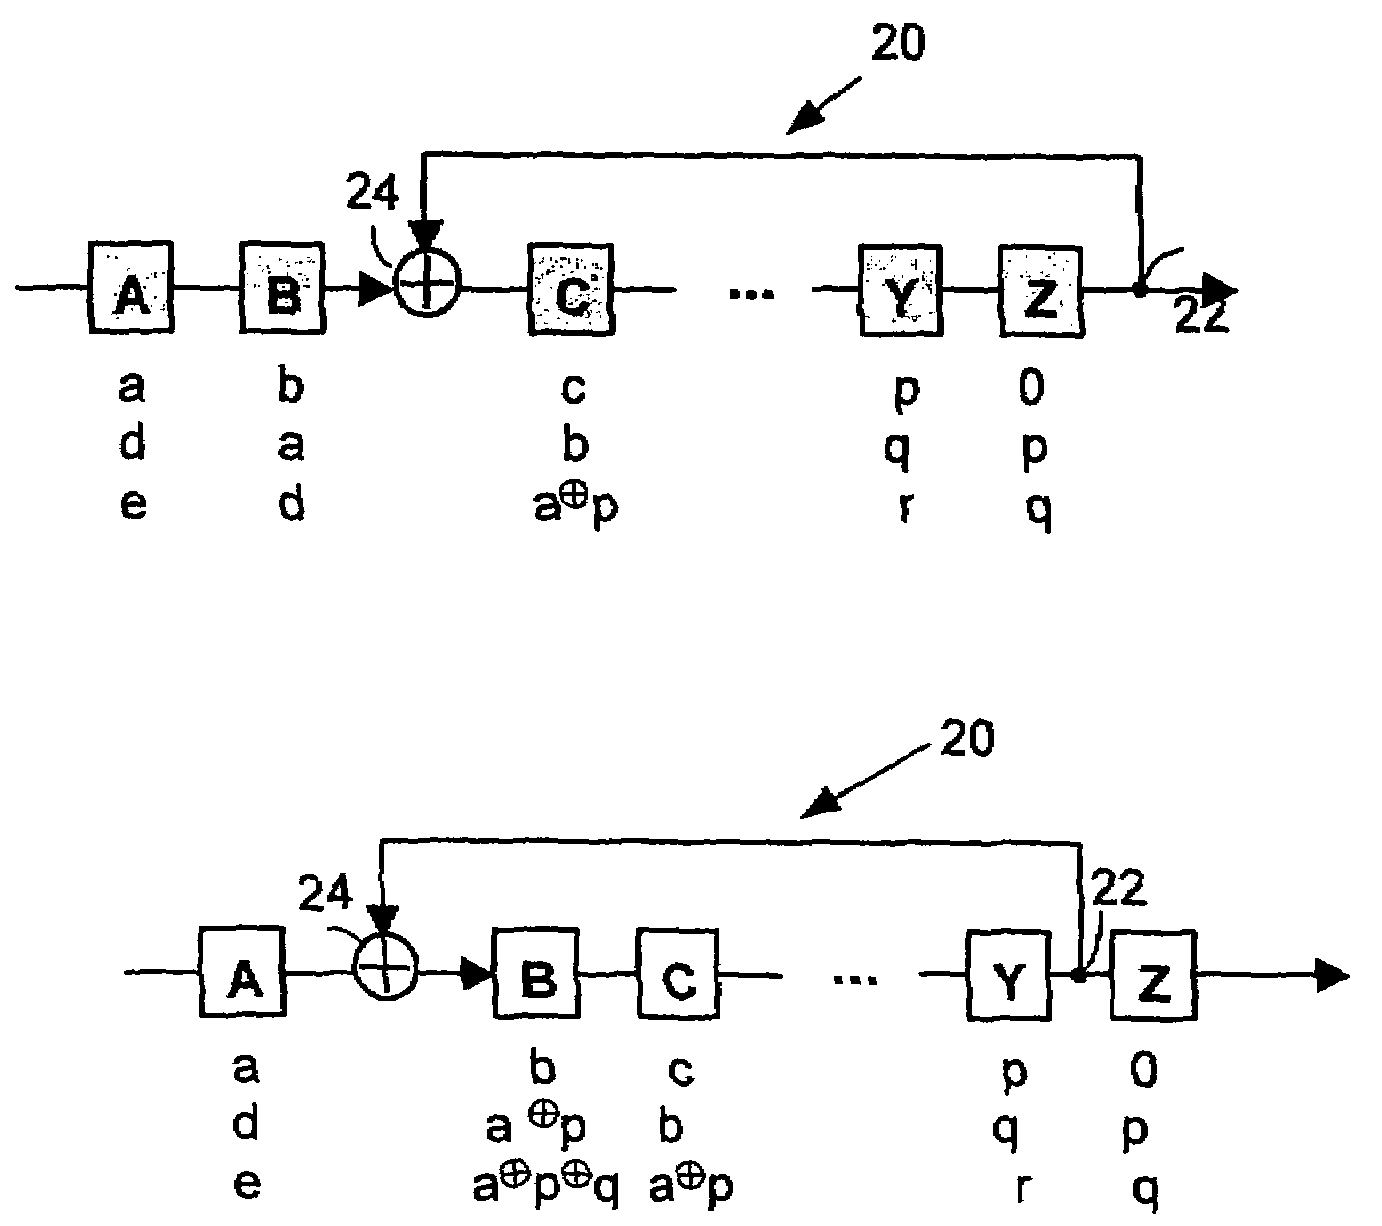 Method for synthesizing linear finite state machines